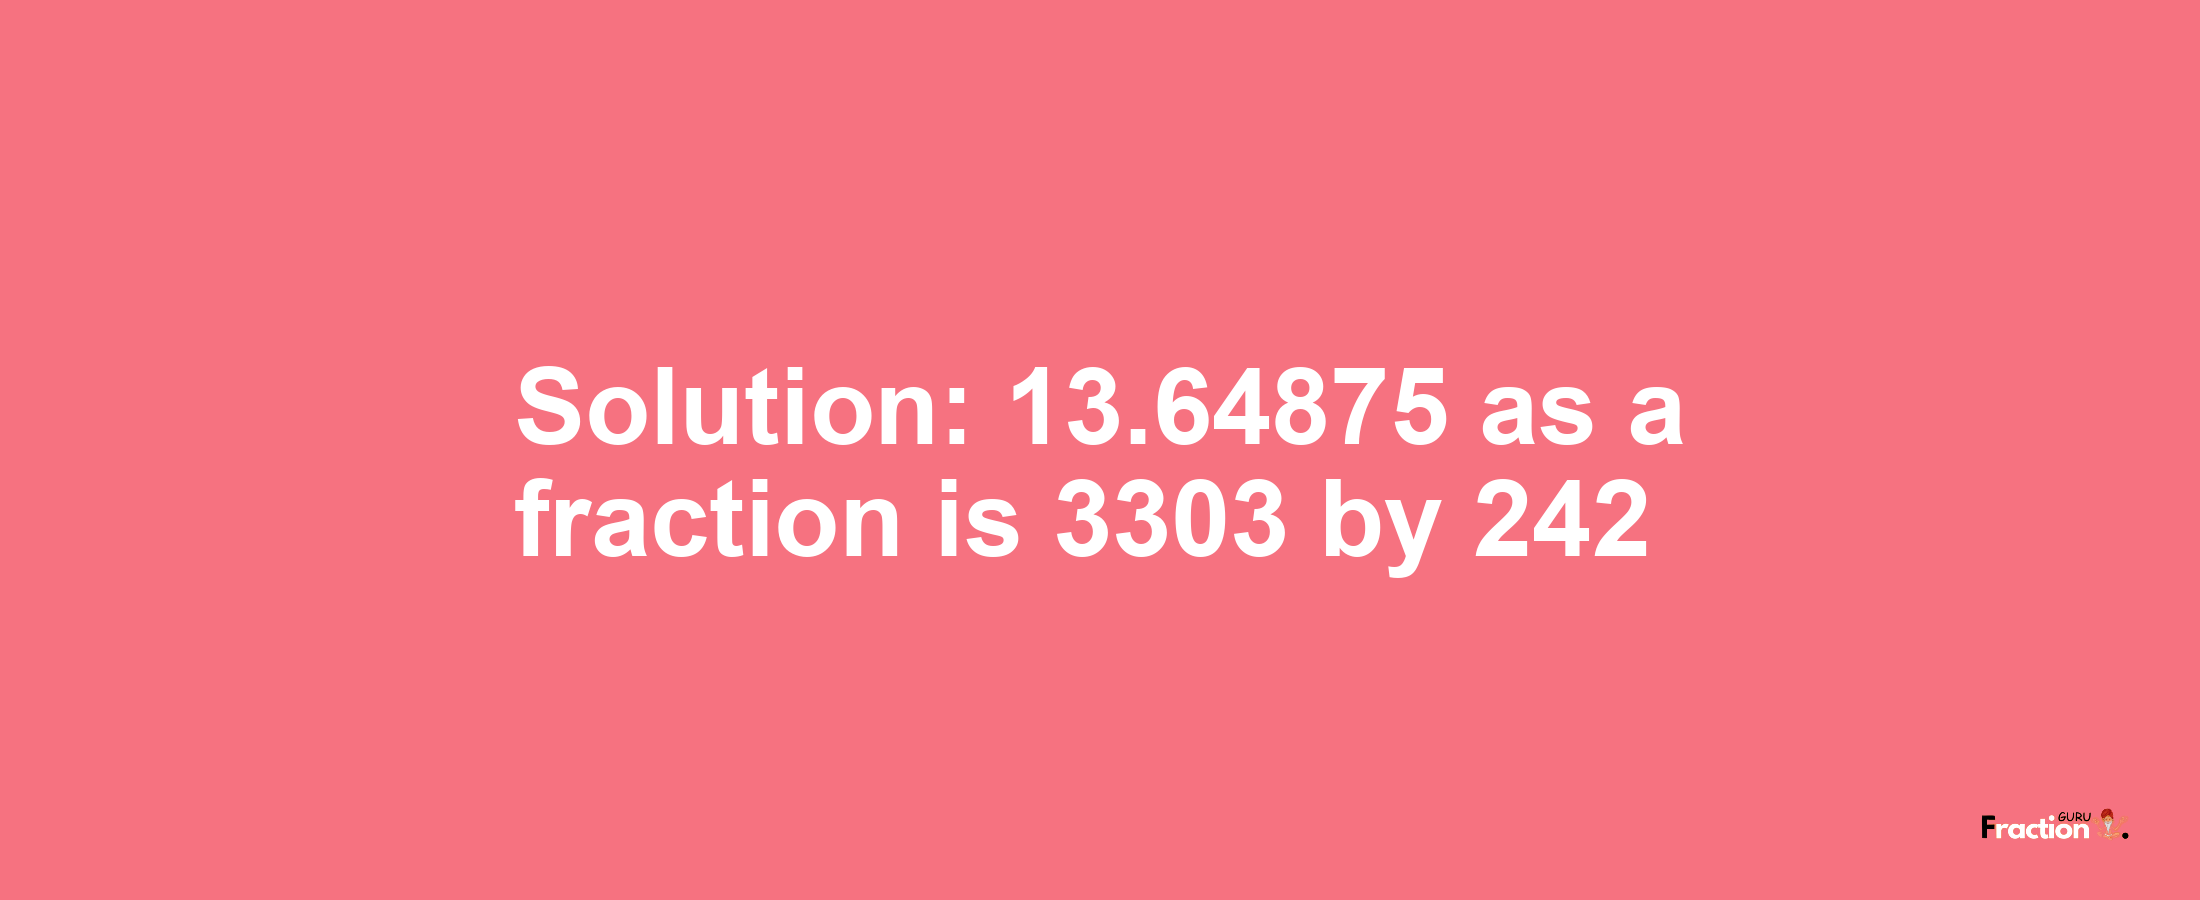 Solution:13.64875 as a fraction is 3303/242